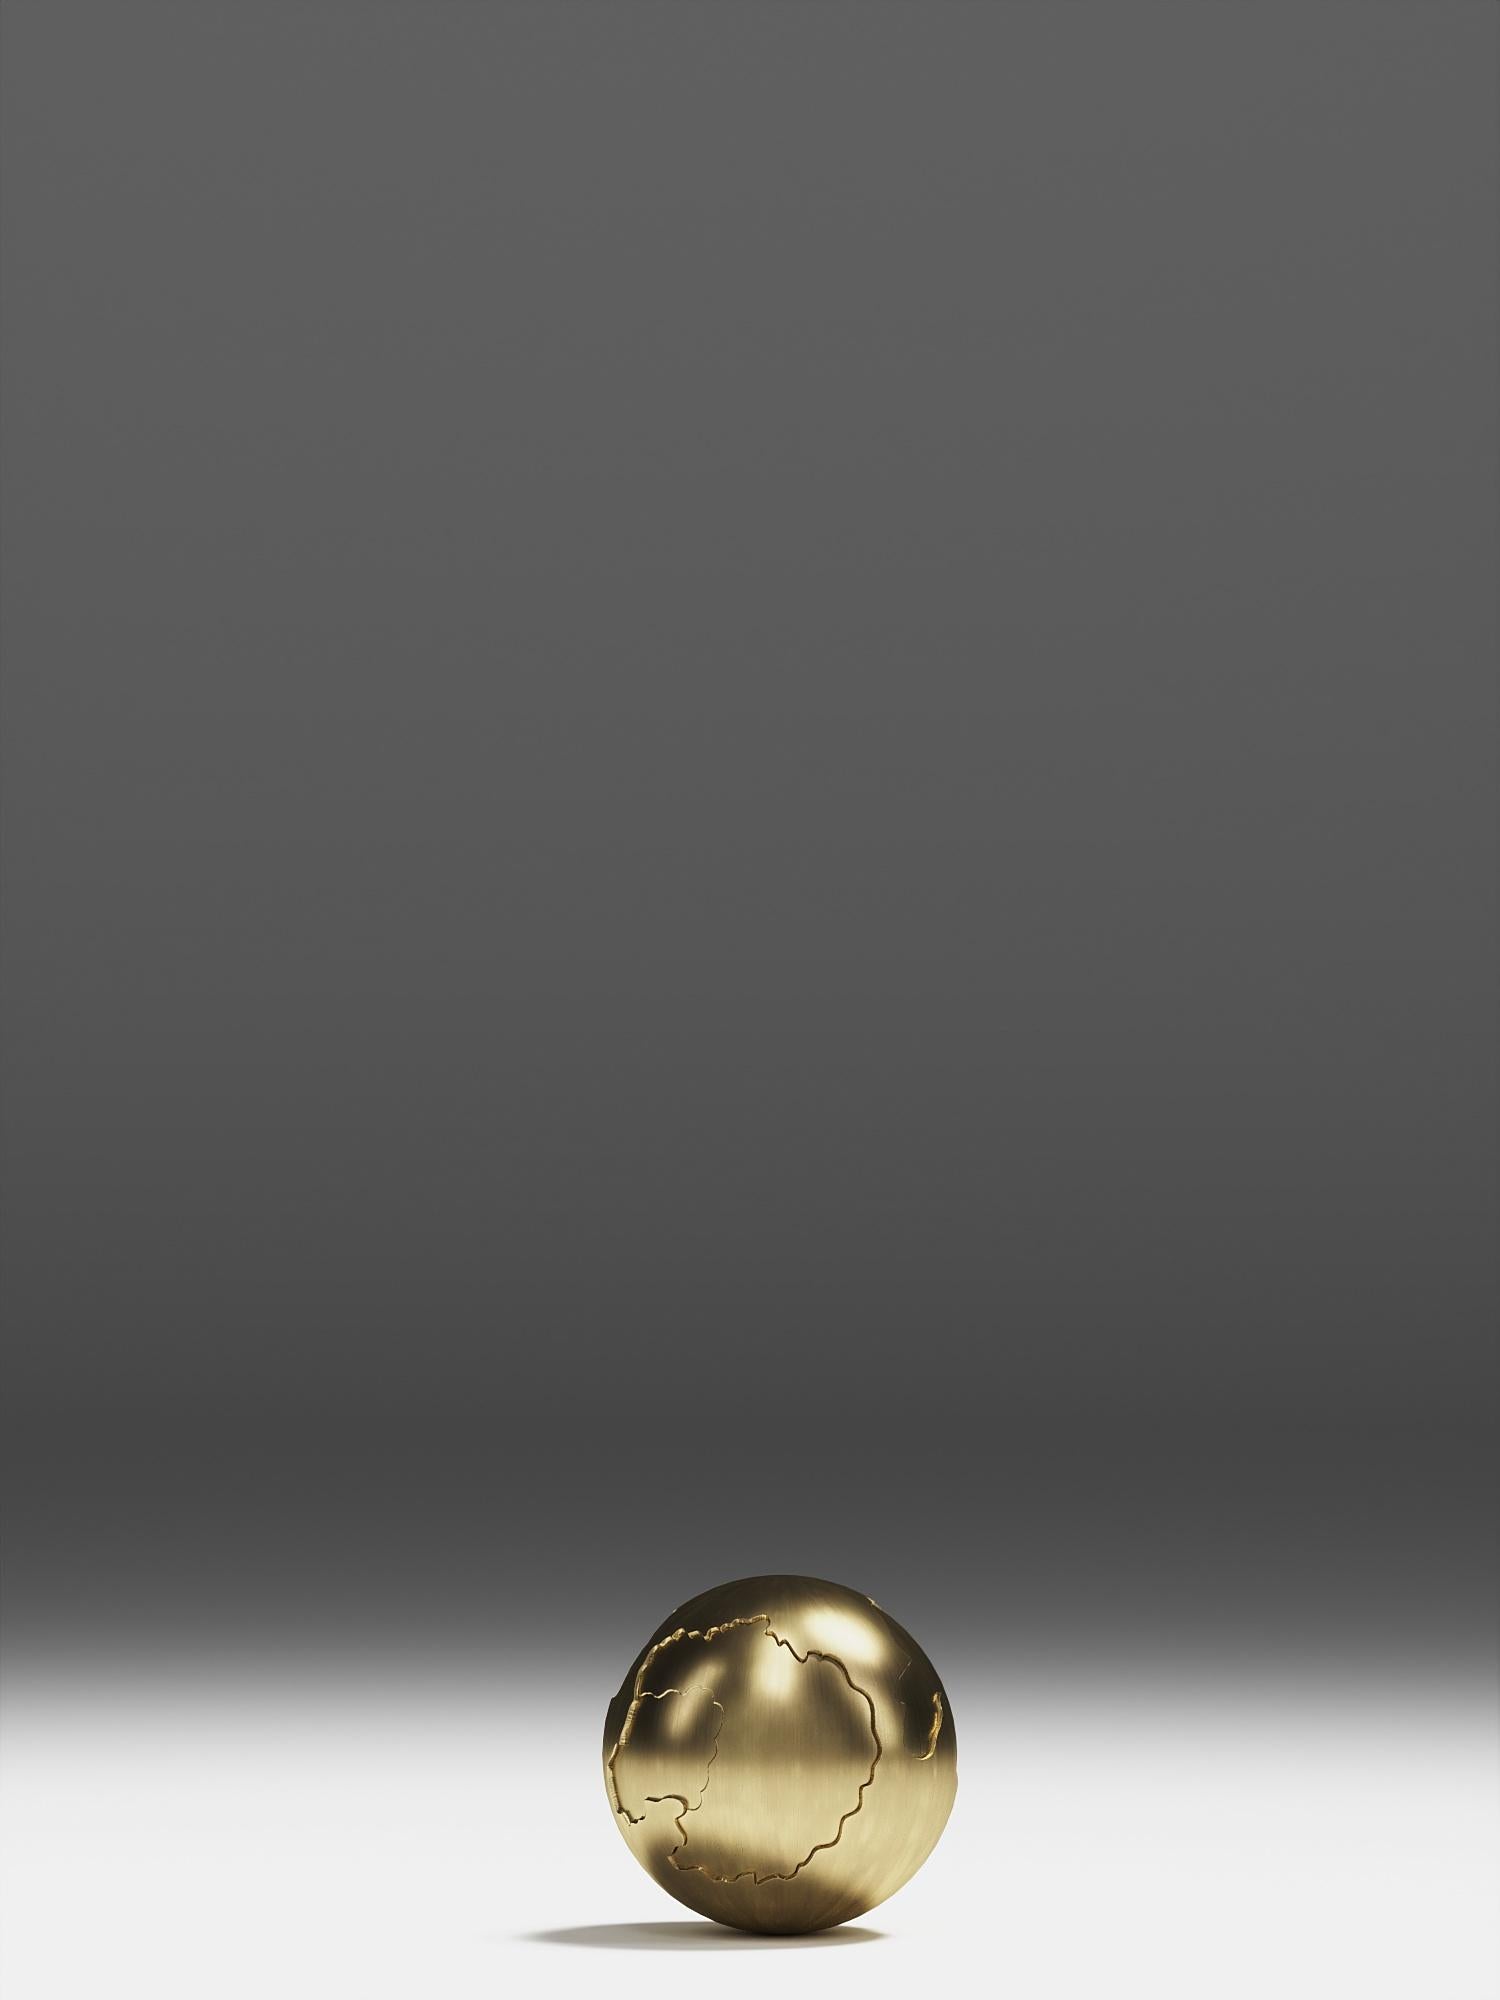 Hand-Crafted Sculptural Bronze-Patina Brass Spheres by Patrick Coard, Paris For Sale